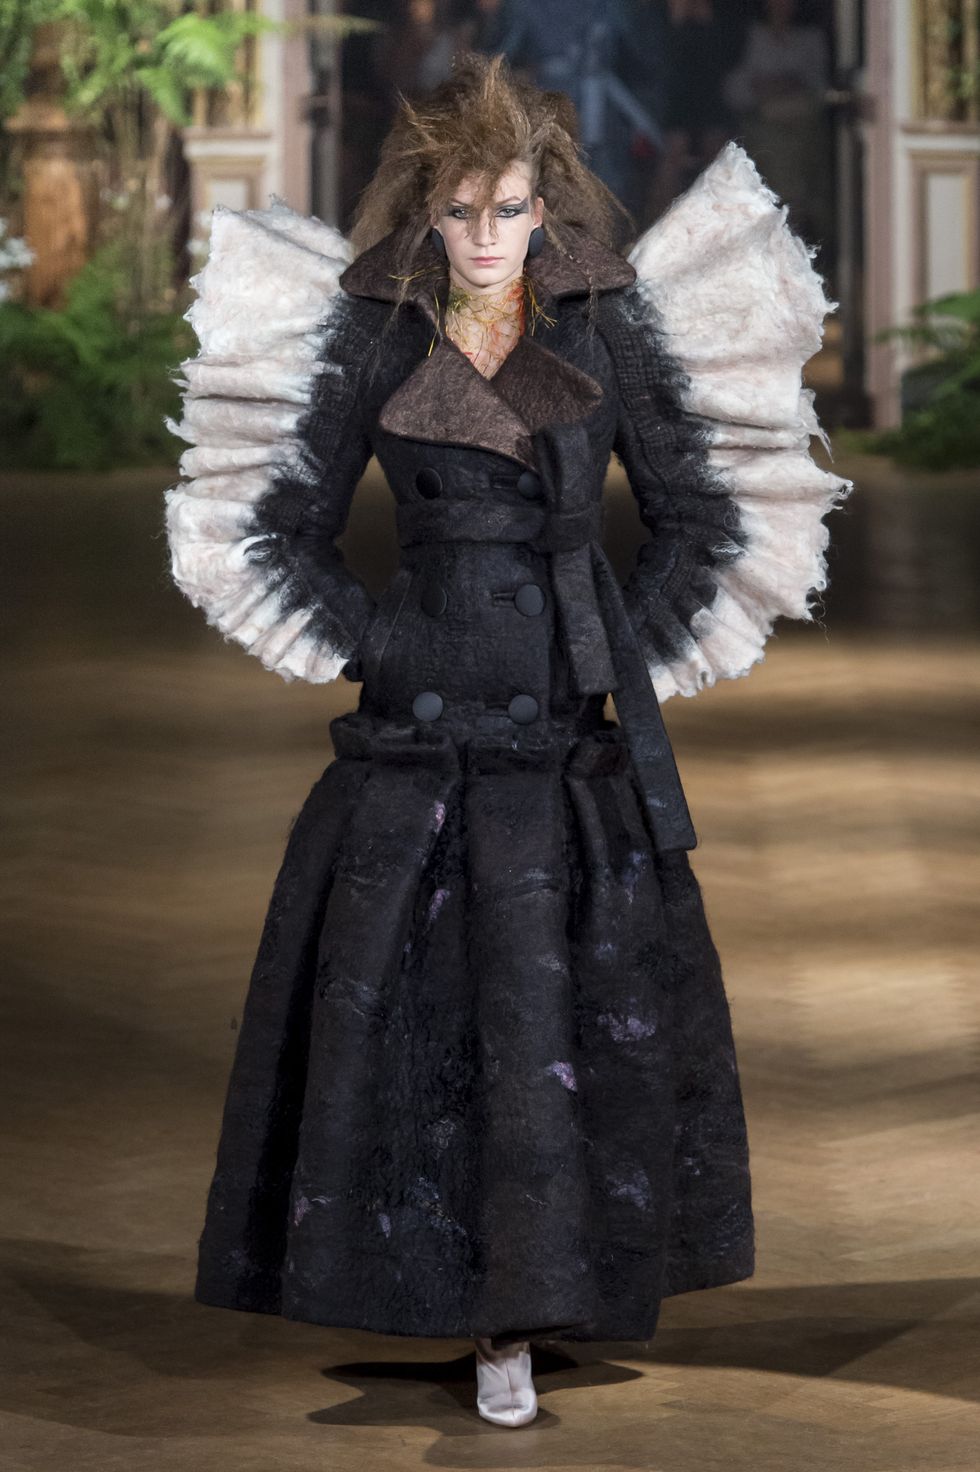 15 Fashionable Halloween Costume Ideas Inspired By The Runway